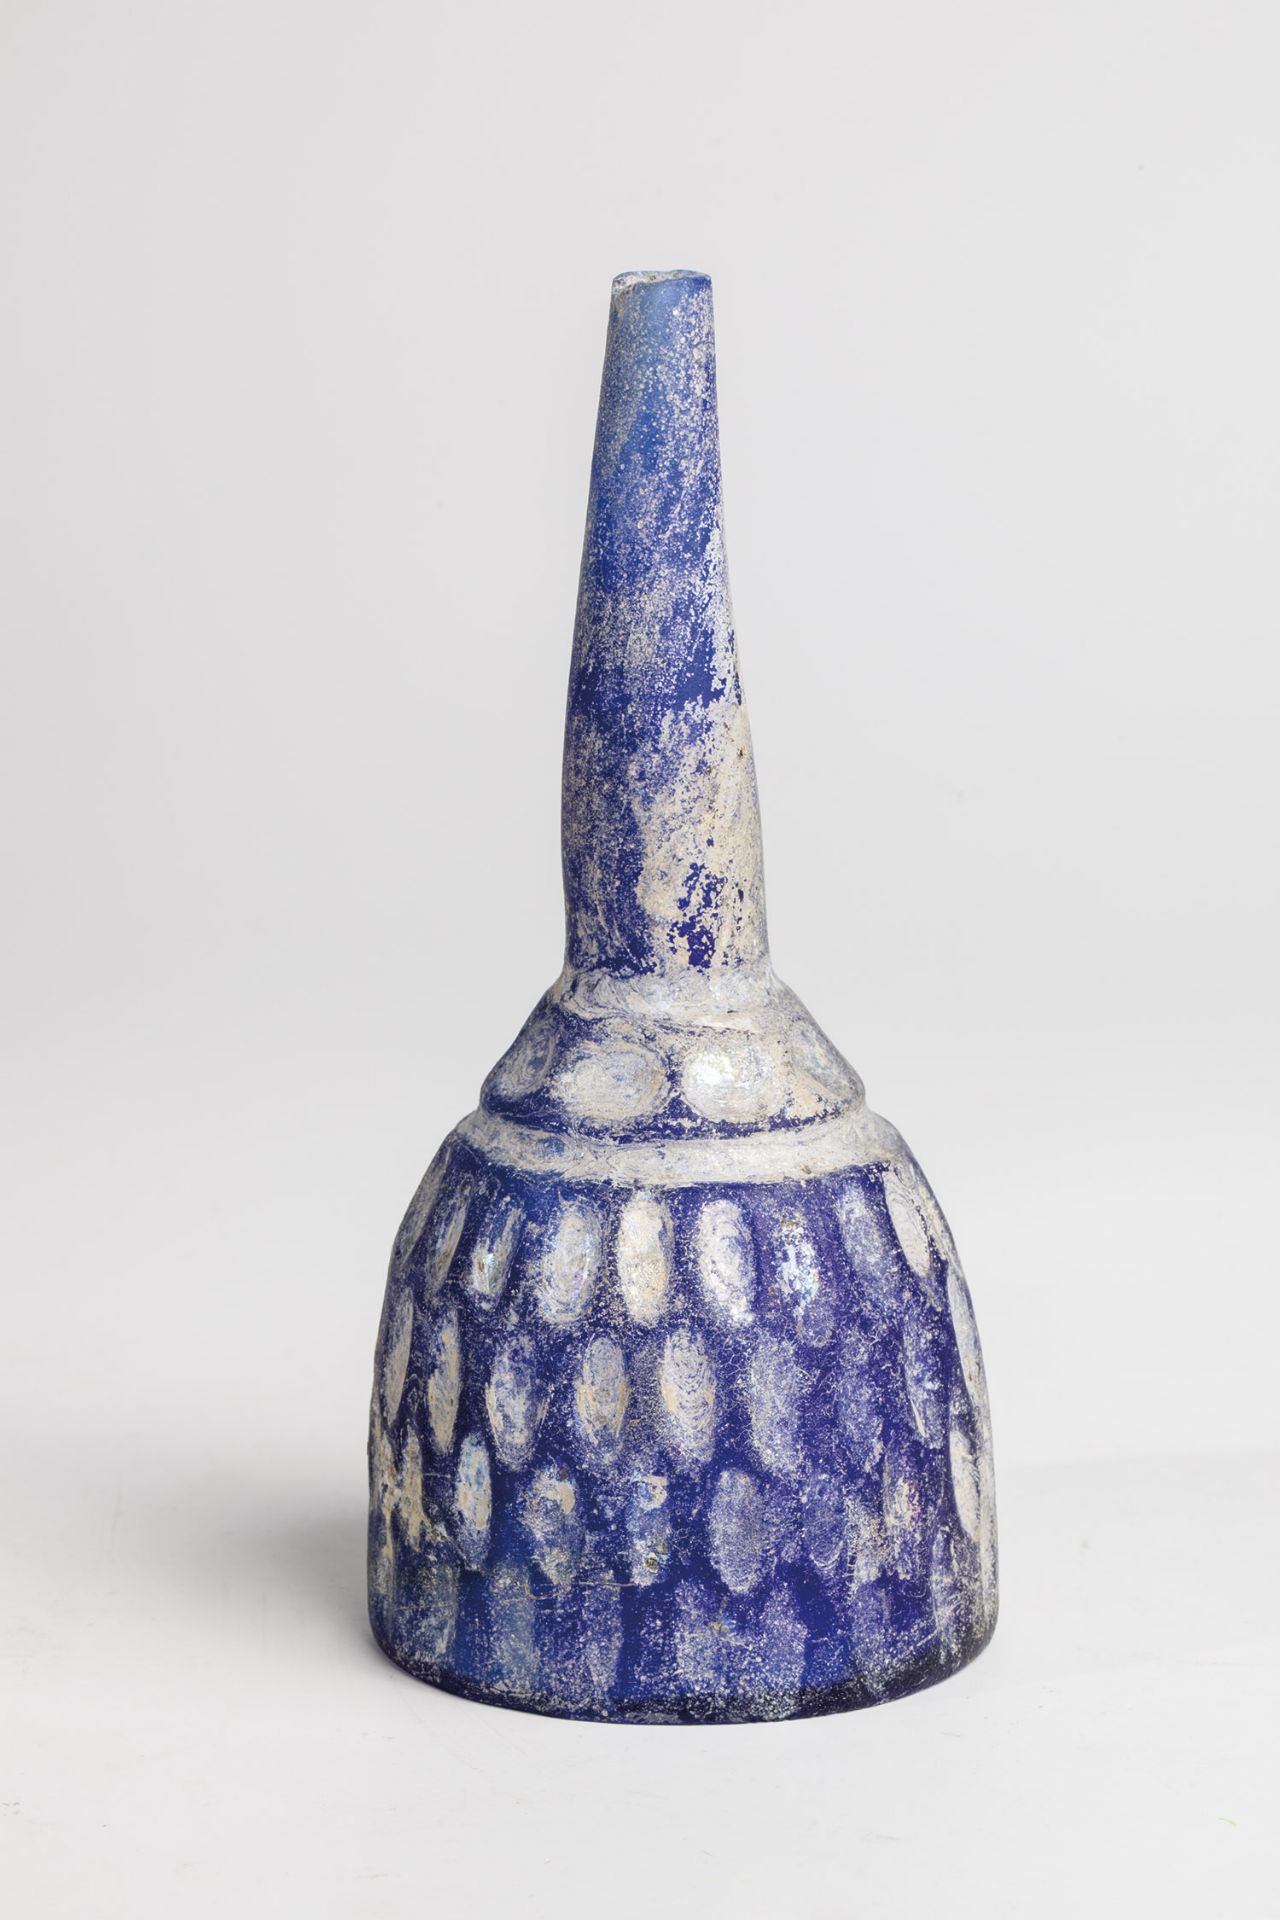 Bottle probably Iran, 9th-10th century A.D. Found in the ground. Cobalt blue glass with cut